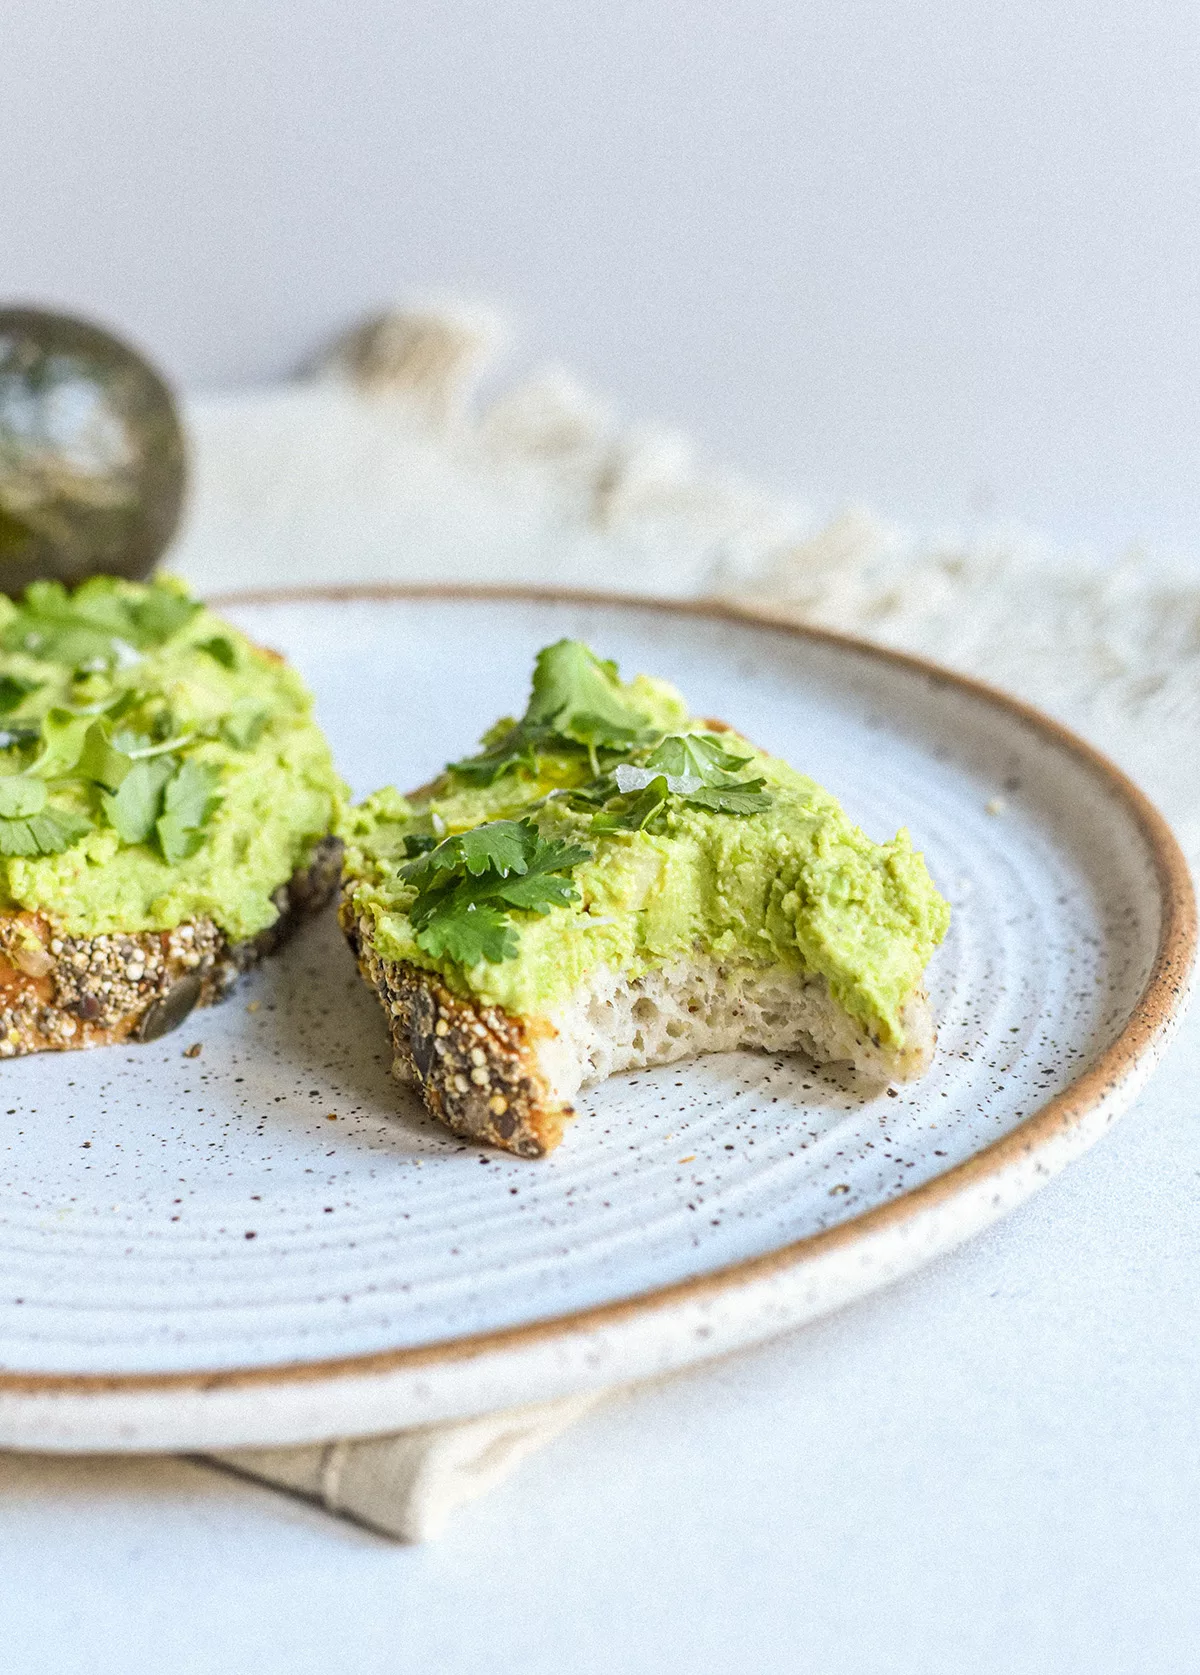 Whole-grain Toast with Avocado or Nut Butter